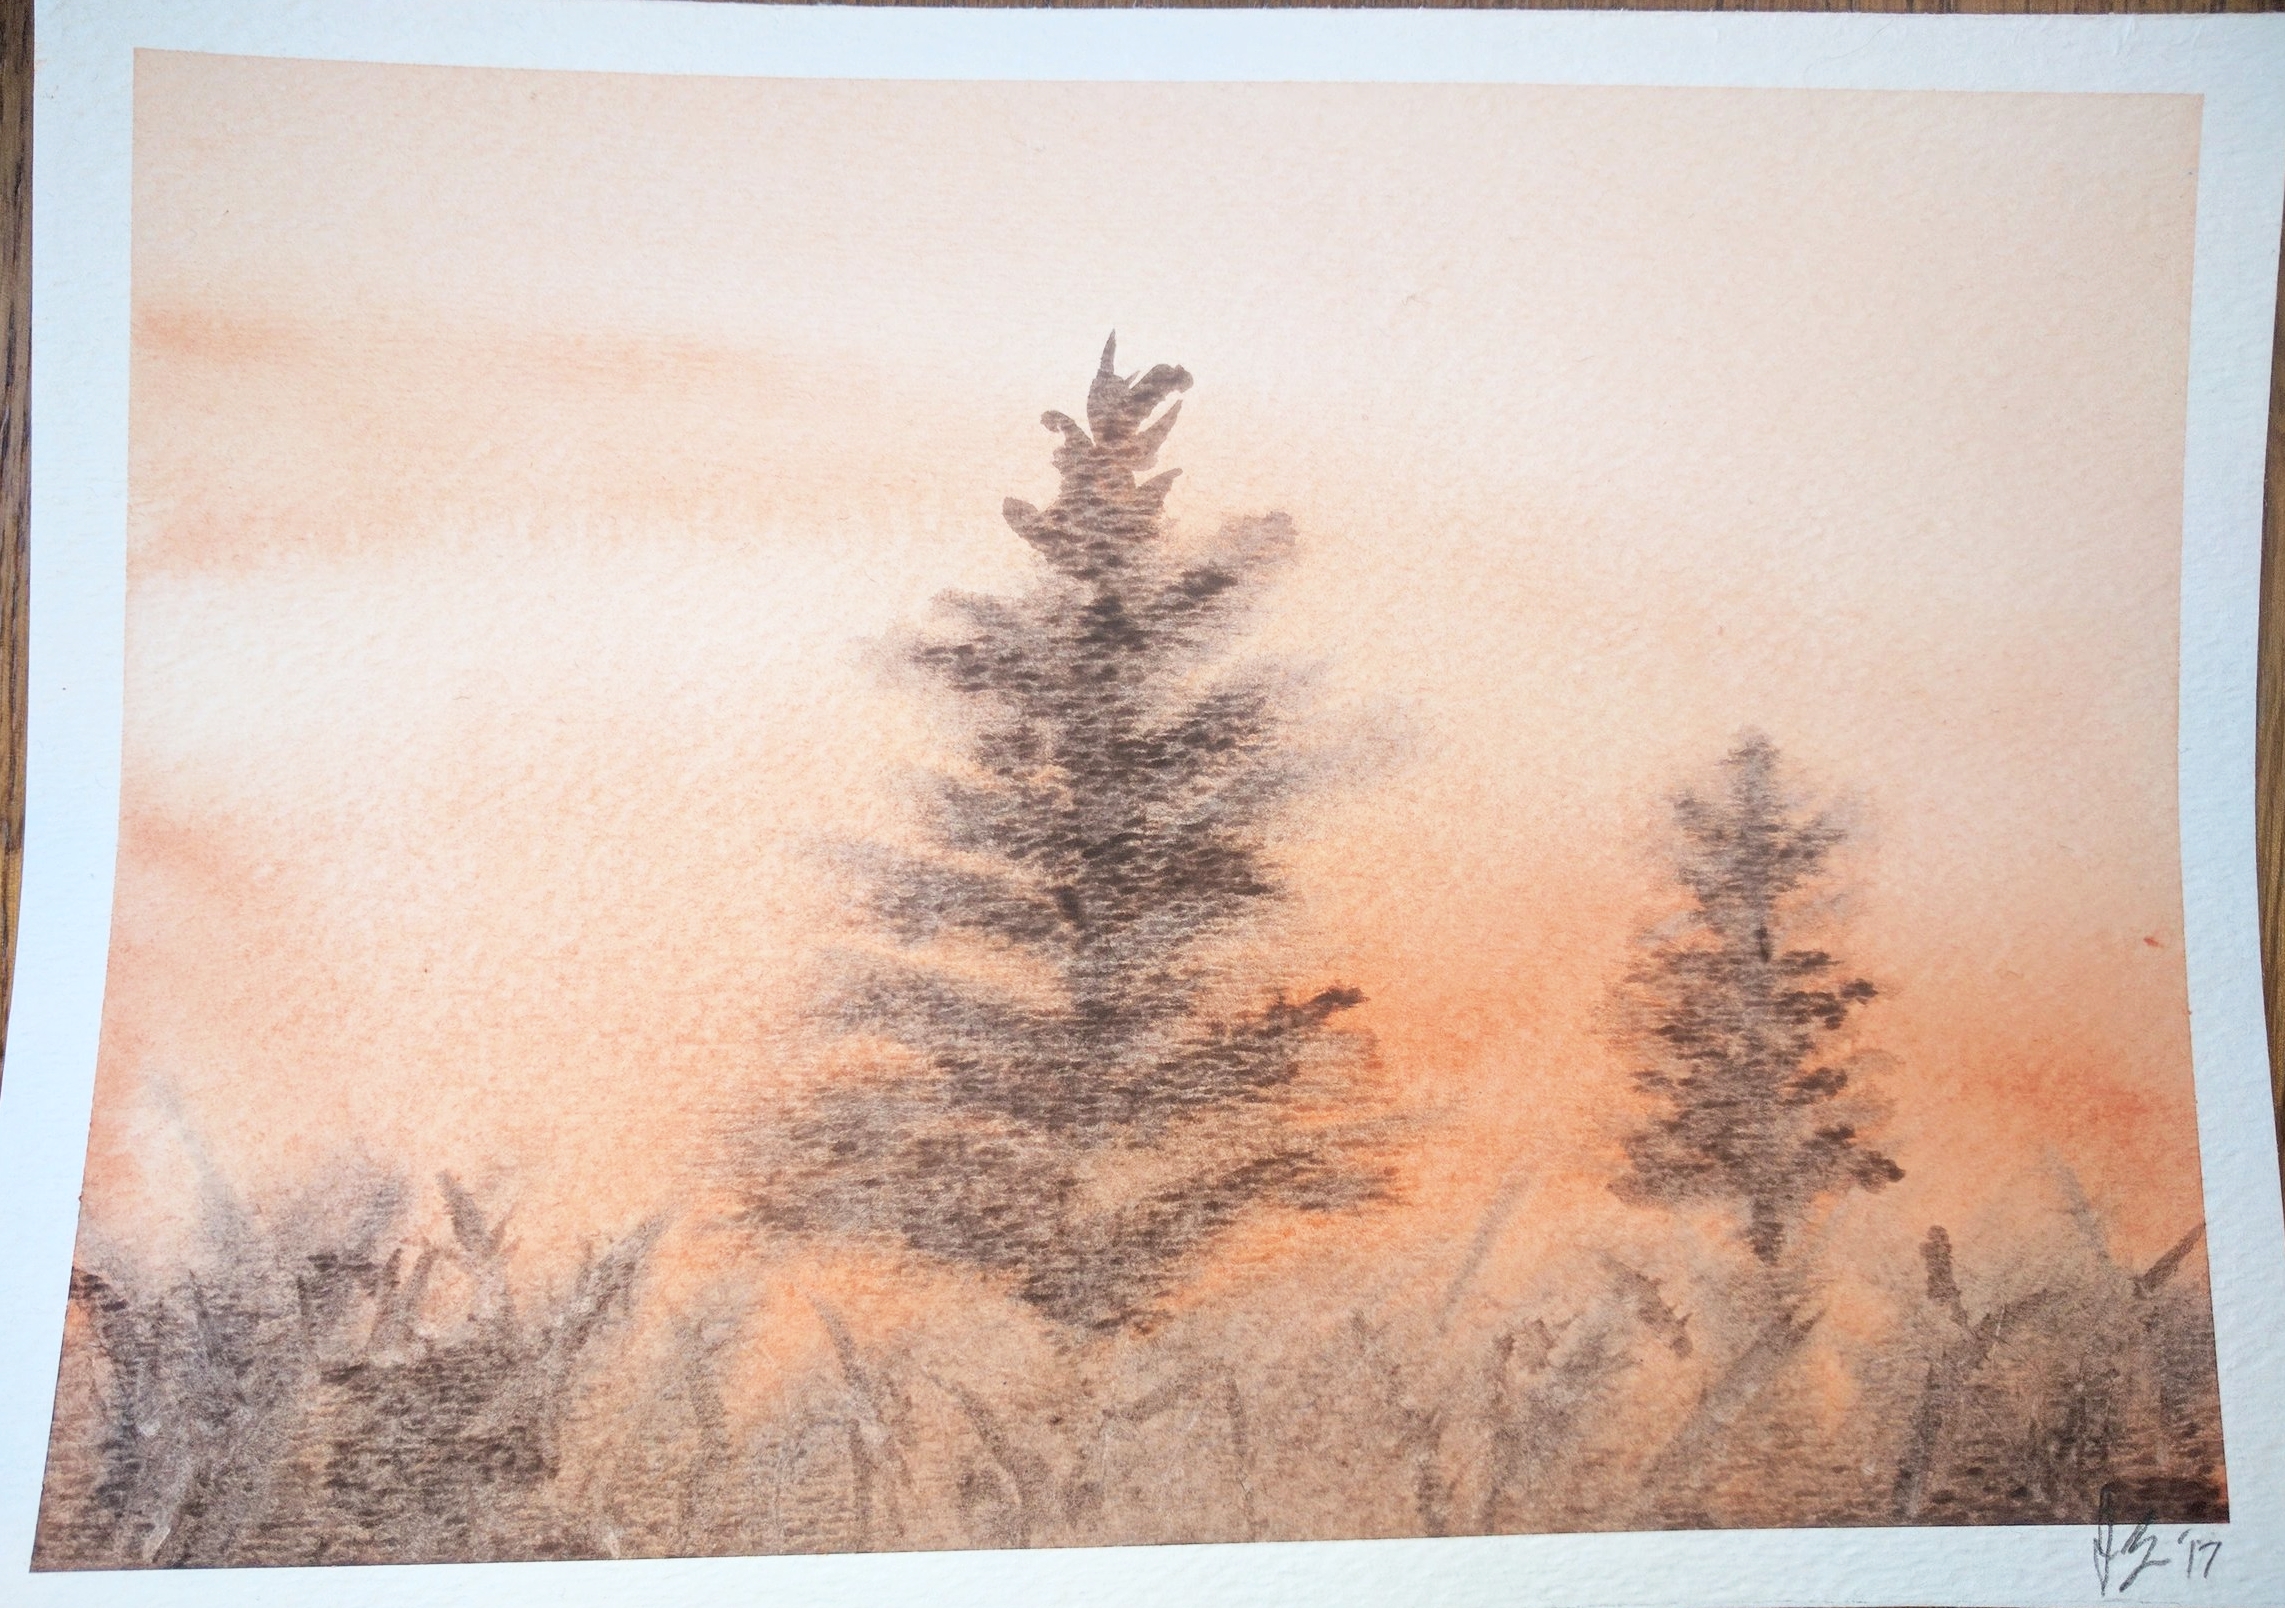  February, 2017  Second attempt at "Two Pines". &nbsp;Attempting this one again has helped me appreciate how finicky the 'wet on wet' technique in watercolor can be. 